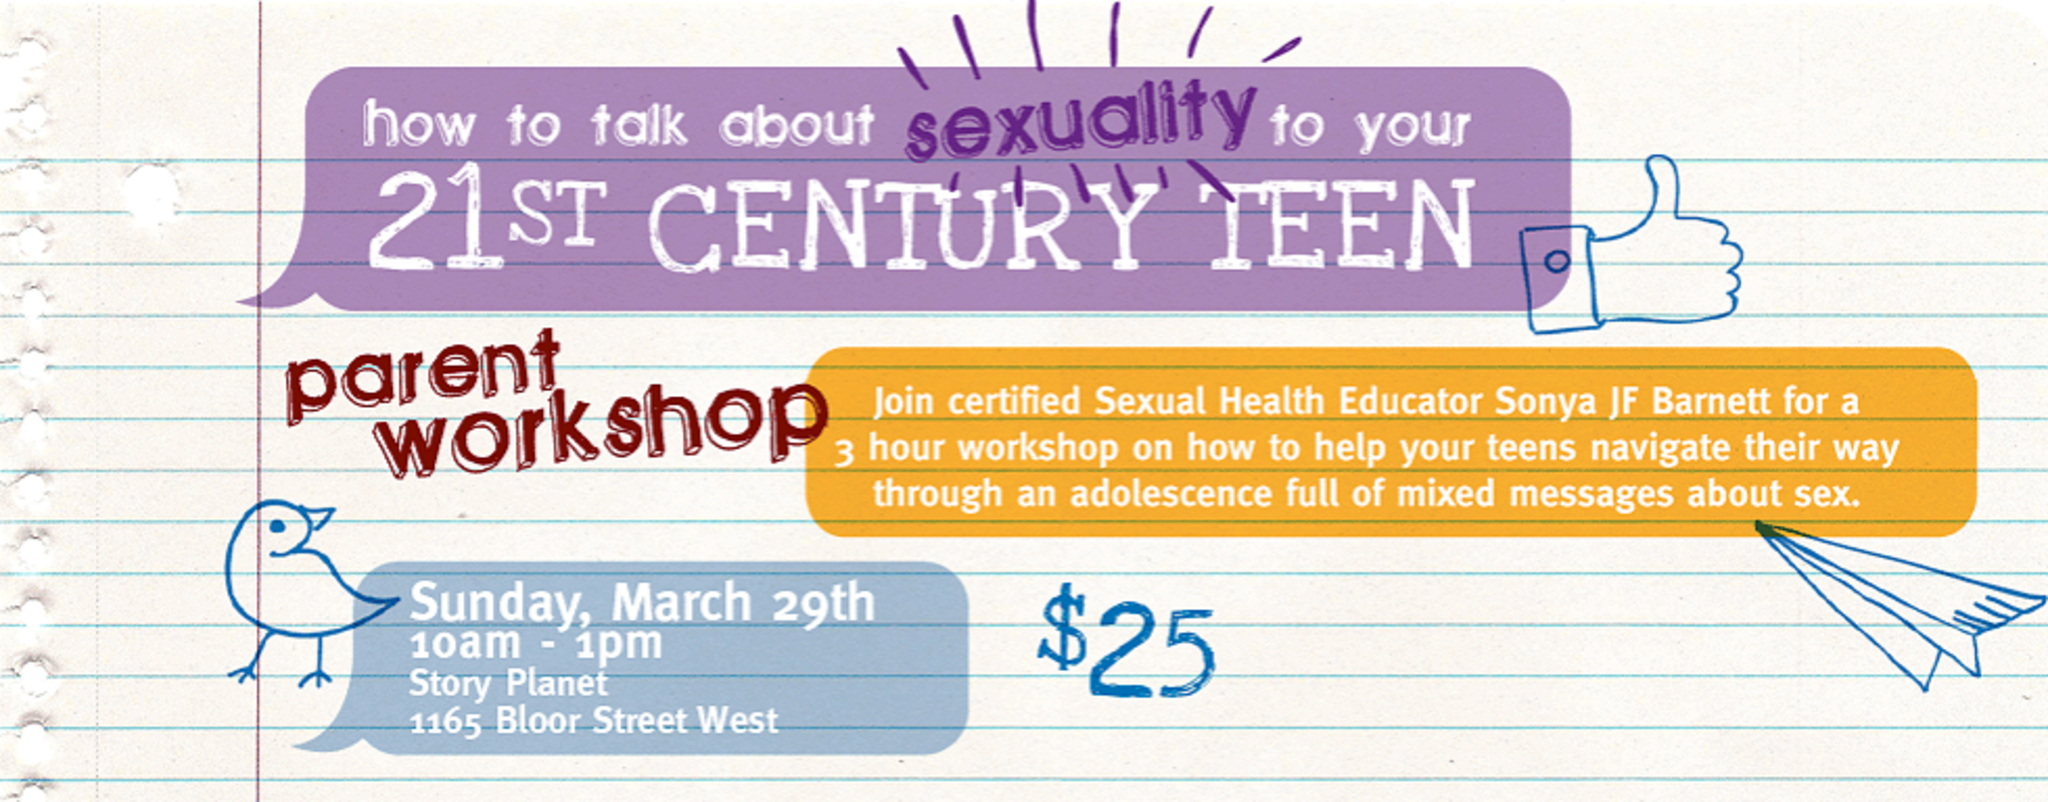 Talking Sexuality To Your 21st Century Teen